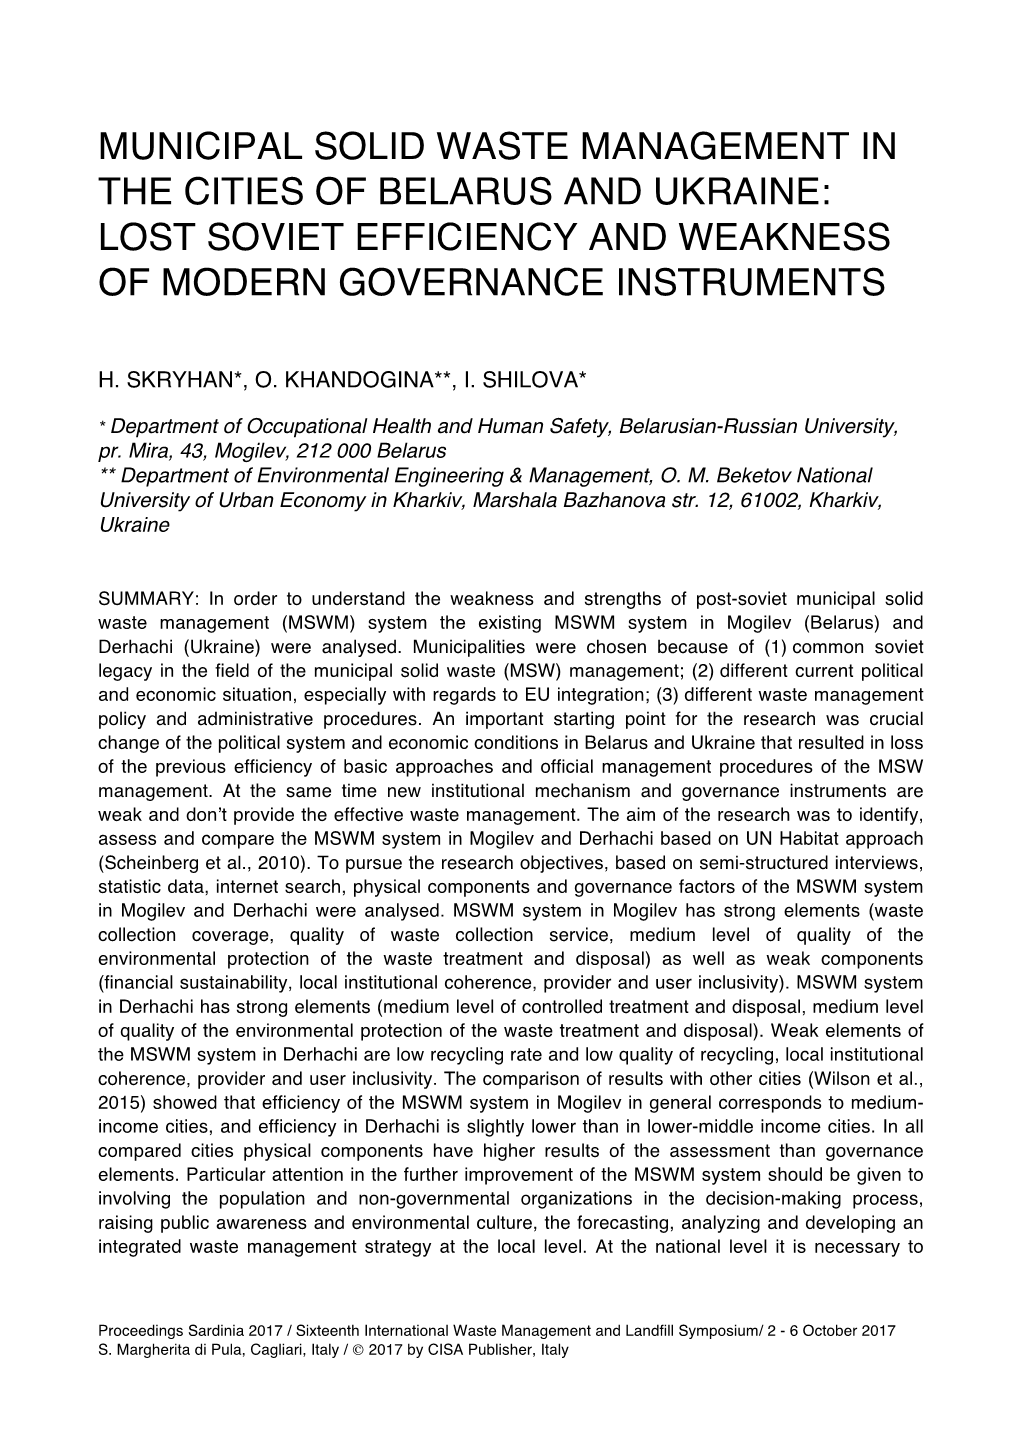 Municipal Solid Waste Management in the Cities of Belarus and Ukraine: Lost Soviet Efficiency and Weakness of Modern Governance Instruments